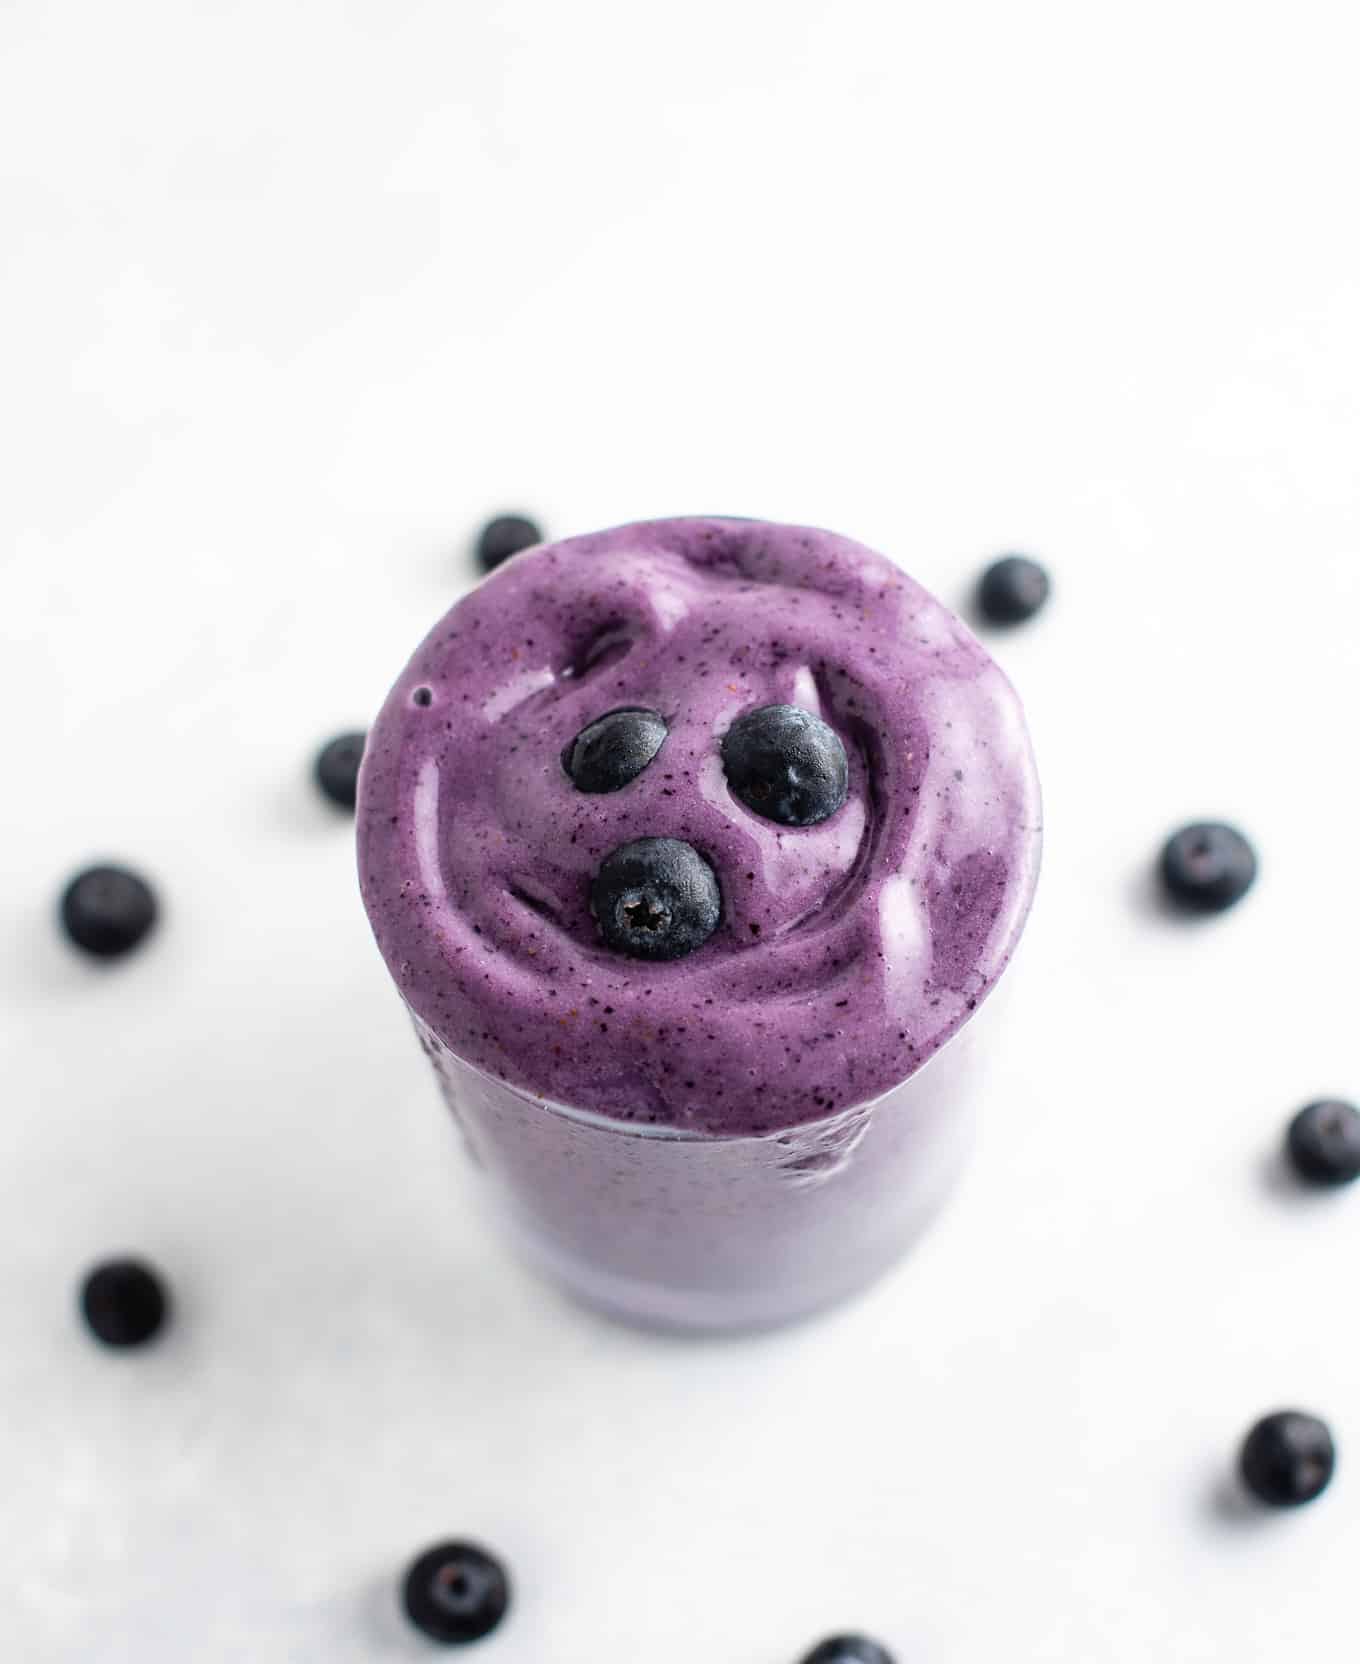  blueberry smoothie in a glass from an overhead view